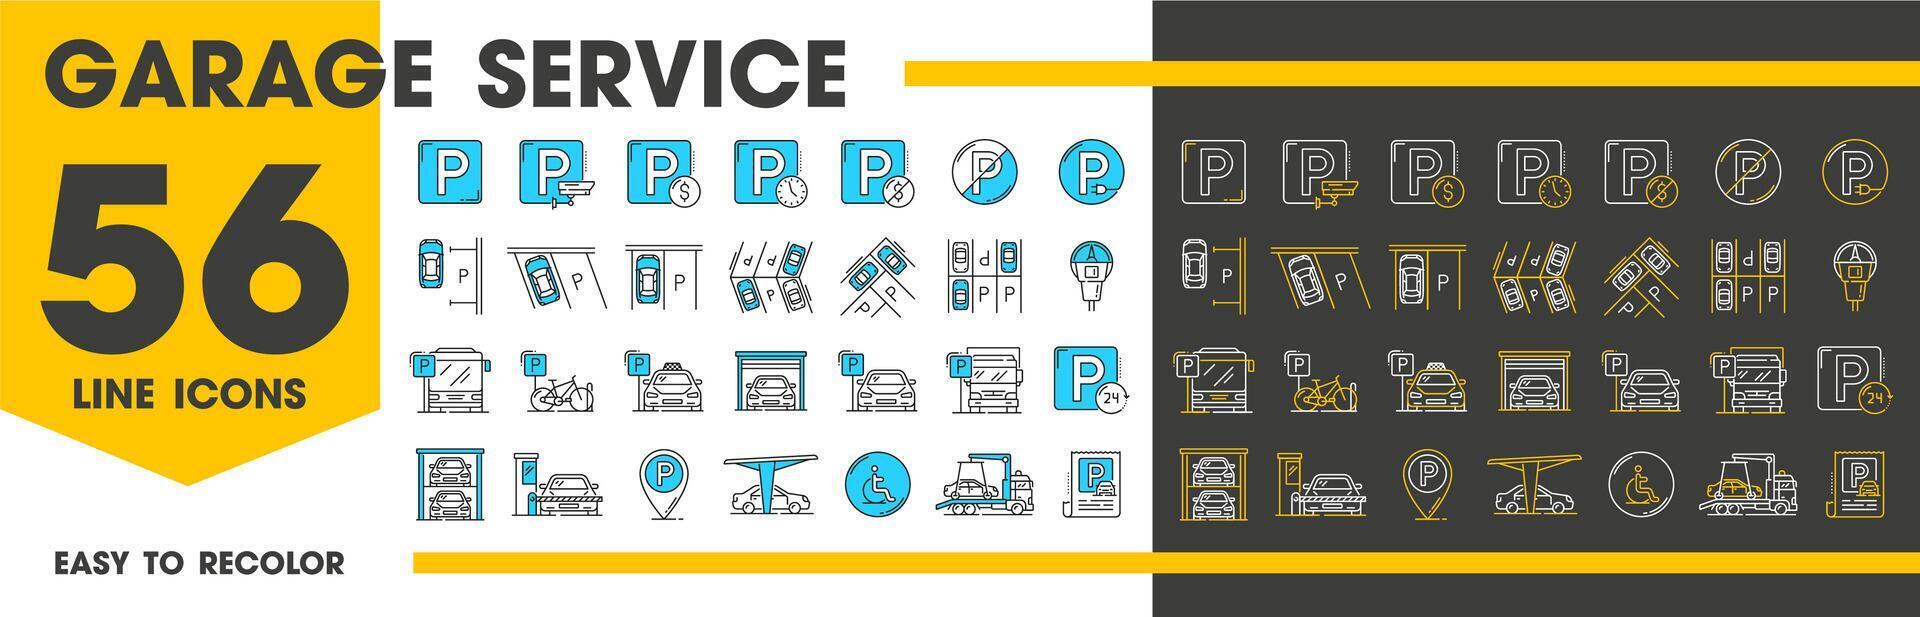 Automatic garage service and parking line icons vector